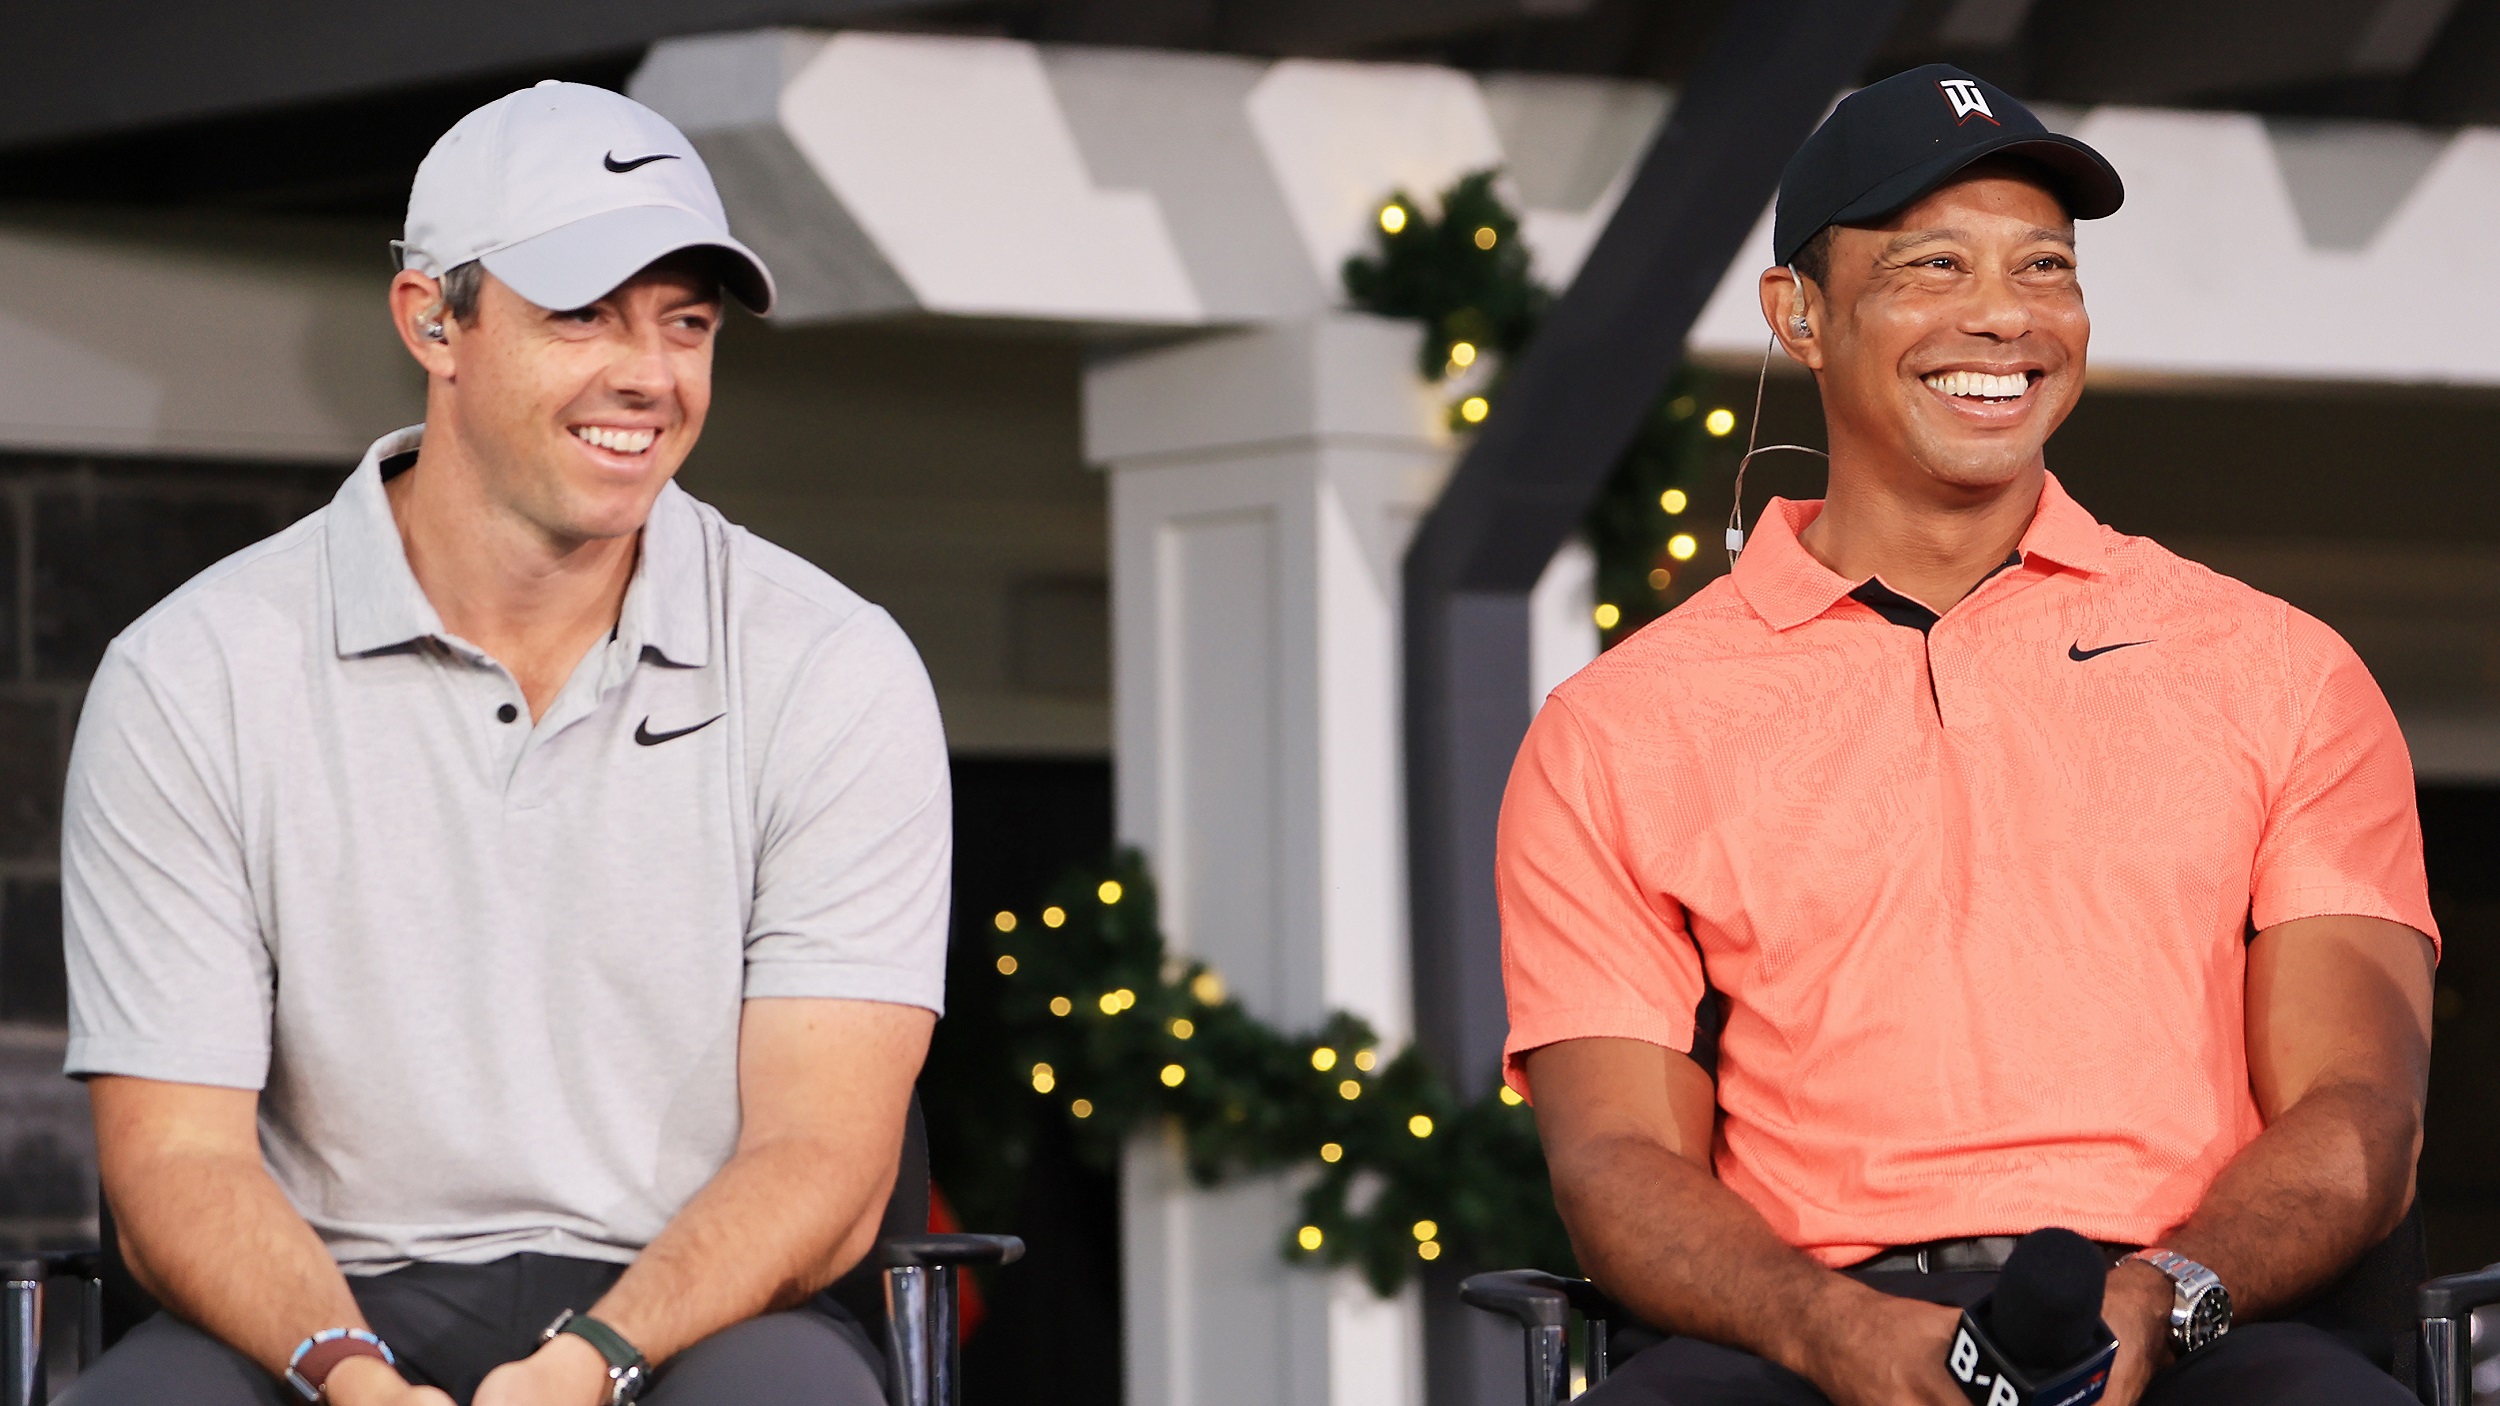 Blank to have Atlanta team in Woods, McIlroy's TGL high-tech golf league